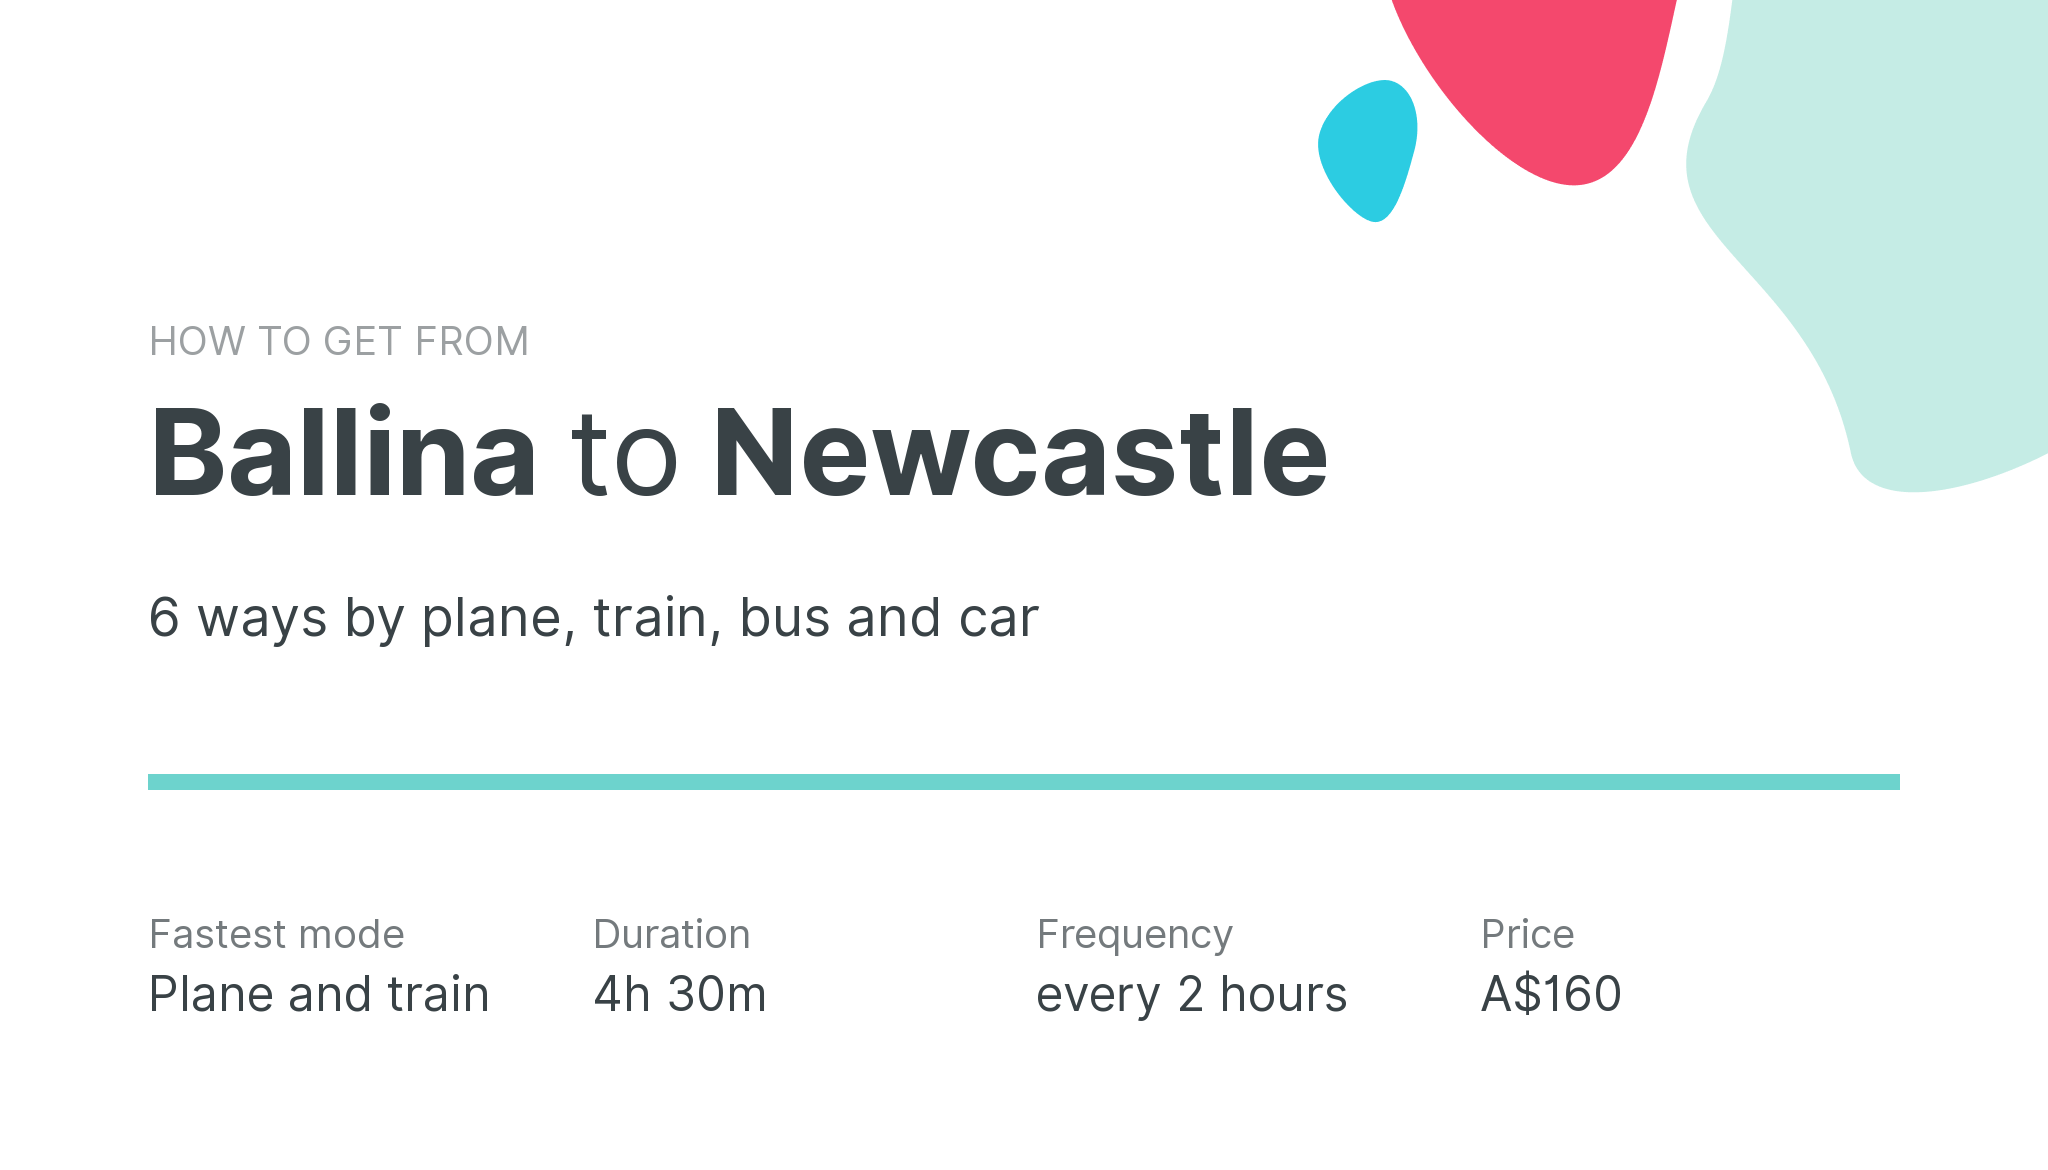 How do I get from Ballina to Newcastle